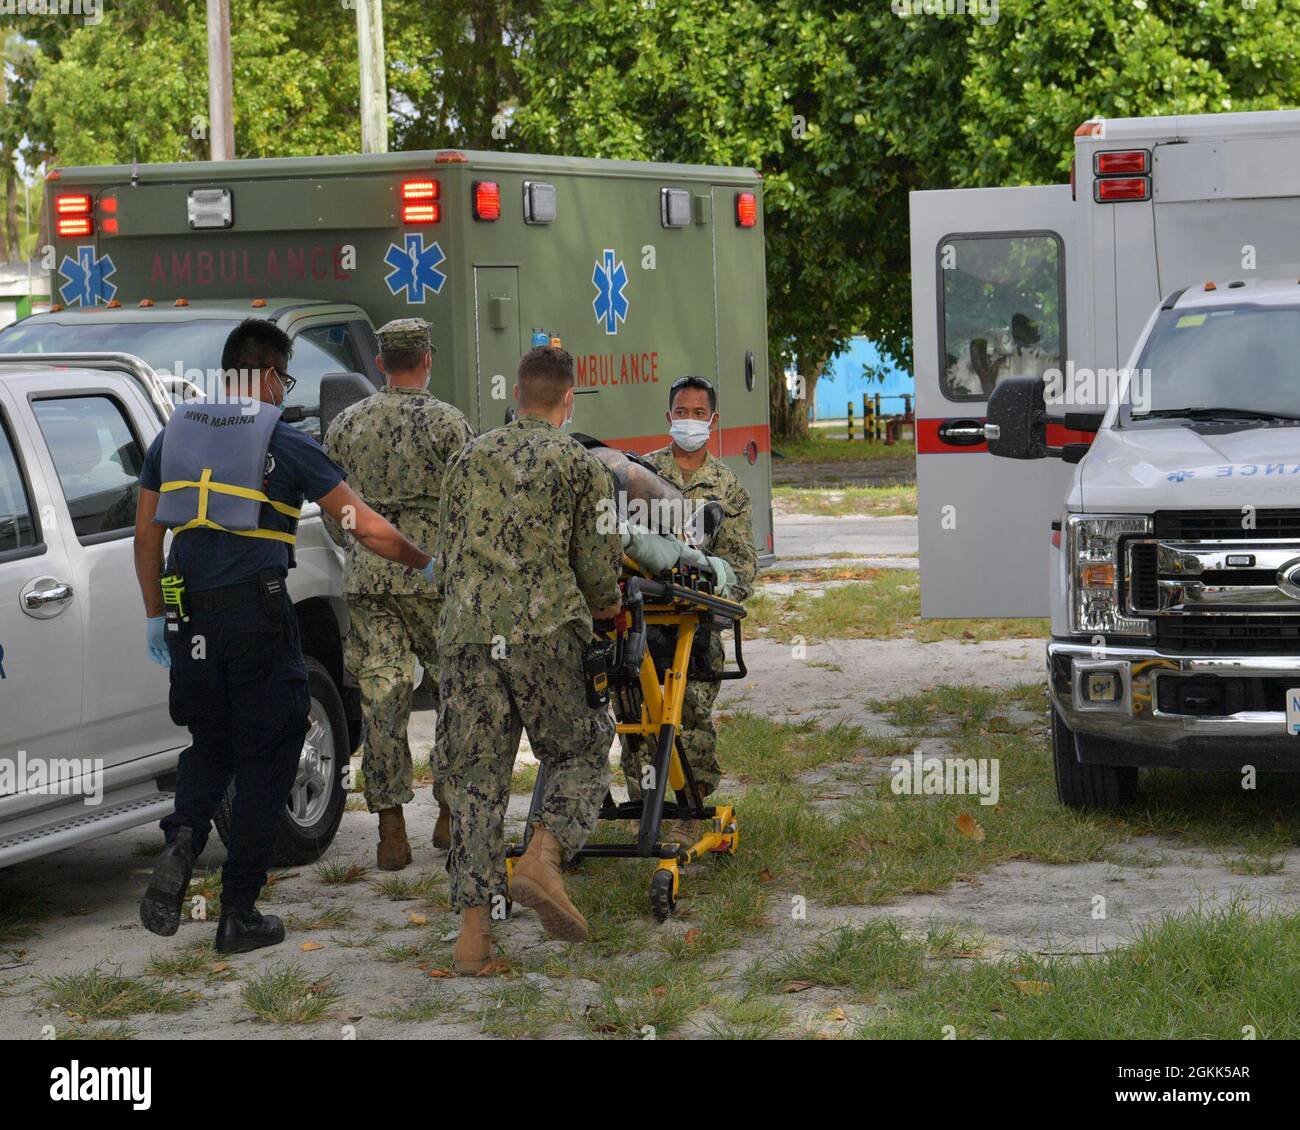 DIEGO GARCIA, British Indian Ocean Territory (May 12, 2021) – U.S. Navy Sailors along with first responders transport a shark attack victim with a gurney to an ambulance during a drill on Diego Garcia, May 12, 2021. U.S. Navy Support Facility Diego Garcia provides logistic, service, recreational and administrative support to U.S. and allied forces forward deployed to the Indian Ocean and Arabian Gulf. Stock Photo